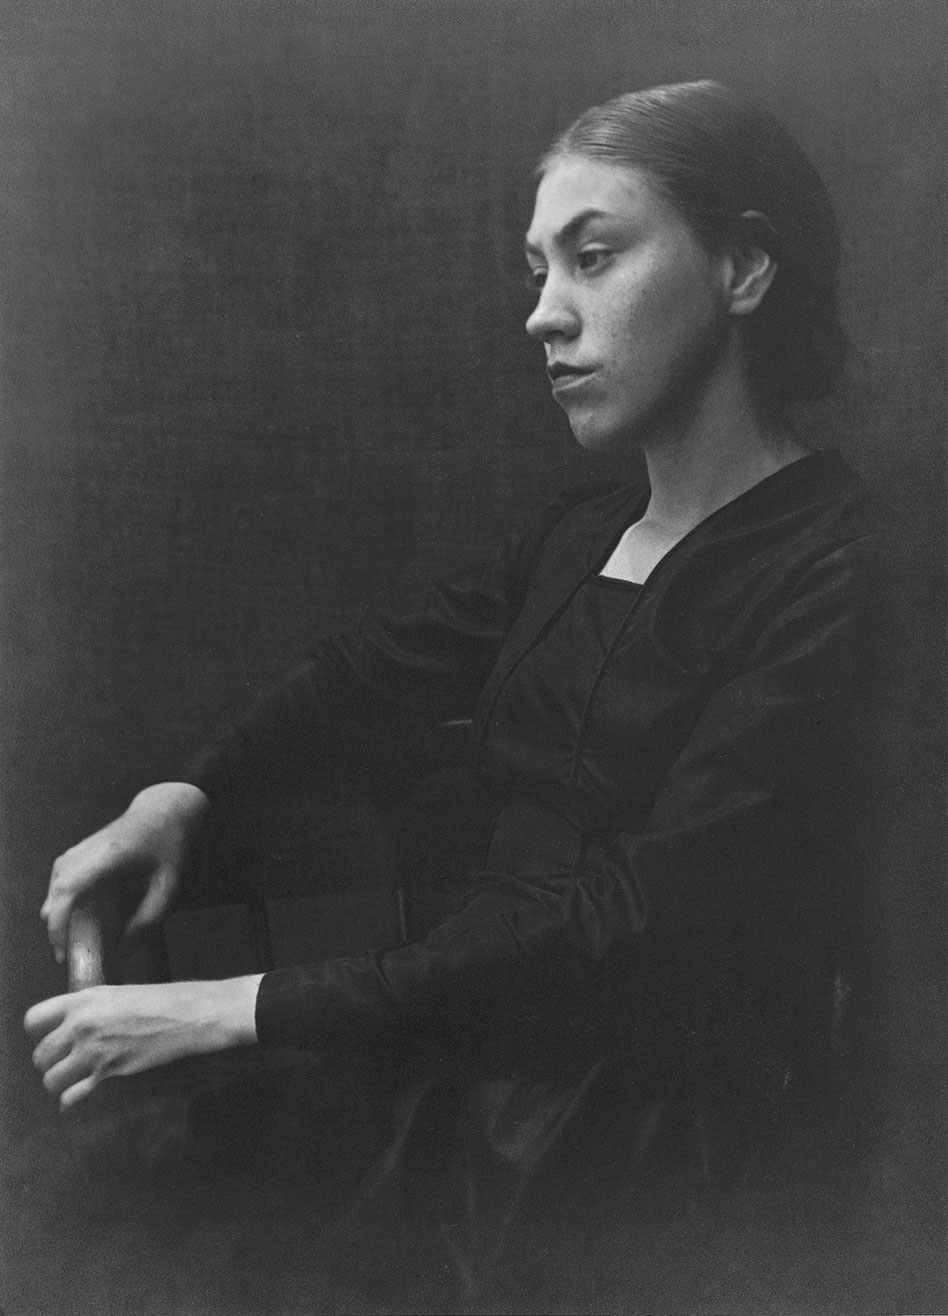 Xenia was photographed by Edward Weston in 1931. This portrait is now in the collection of New York’s Metropolitan Museum of Art.